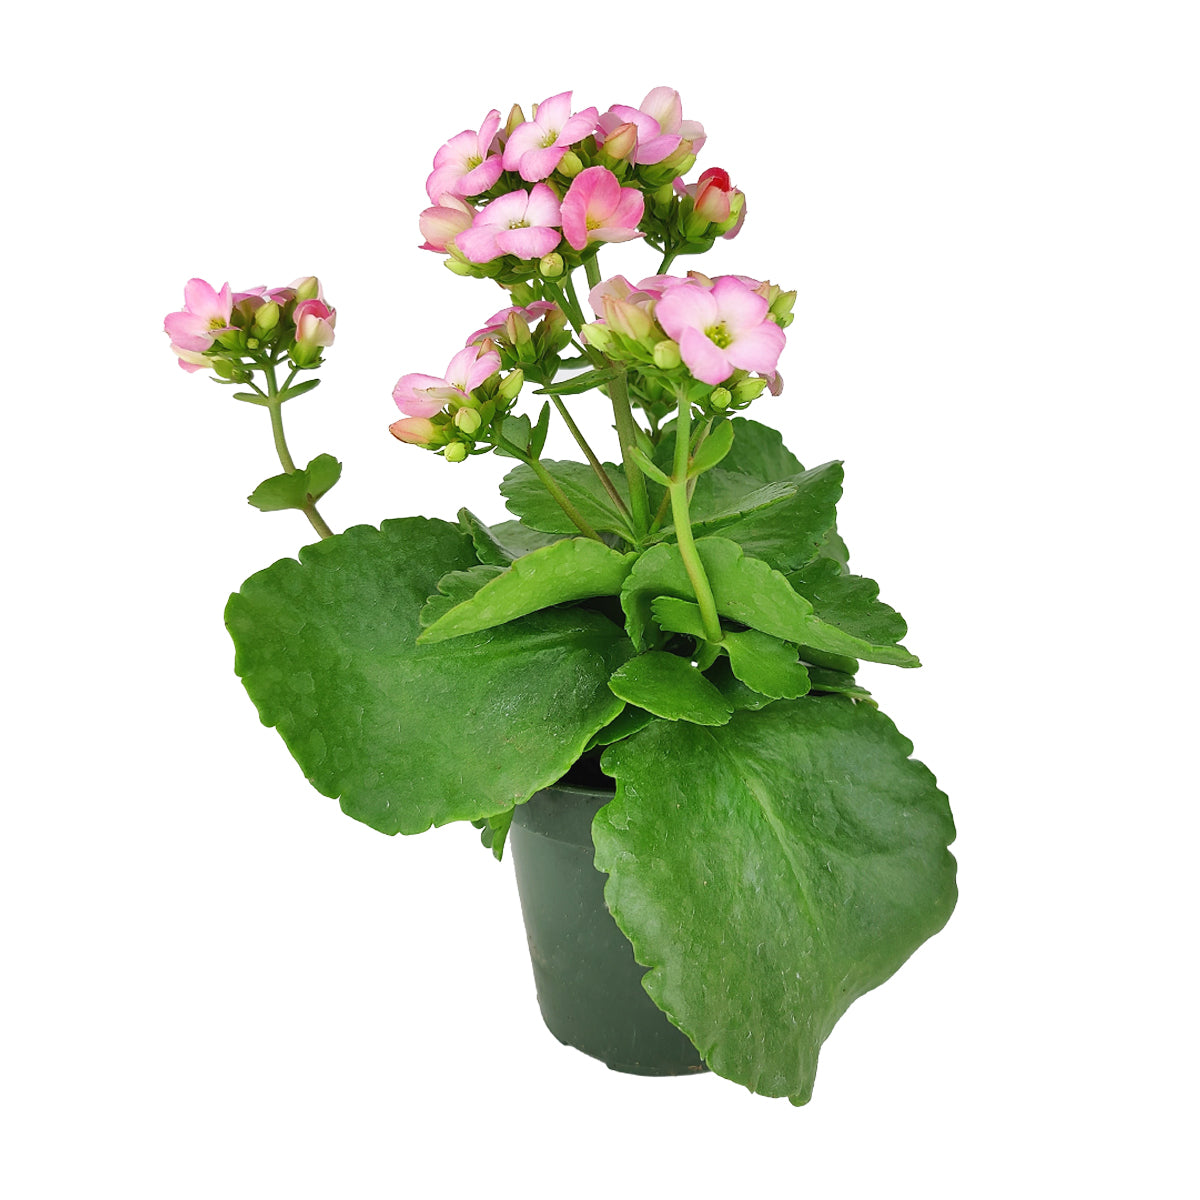 Kalanchoe blossfeldiana Calandiva Pink, Canlandiva for sale, pink flower houseplant, easy care flowering plant for homes and office, best gift plant ideas